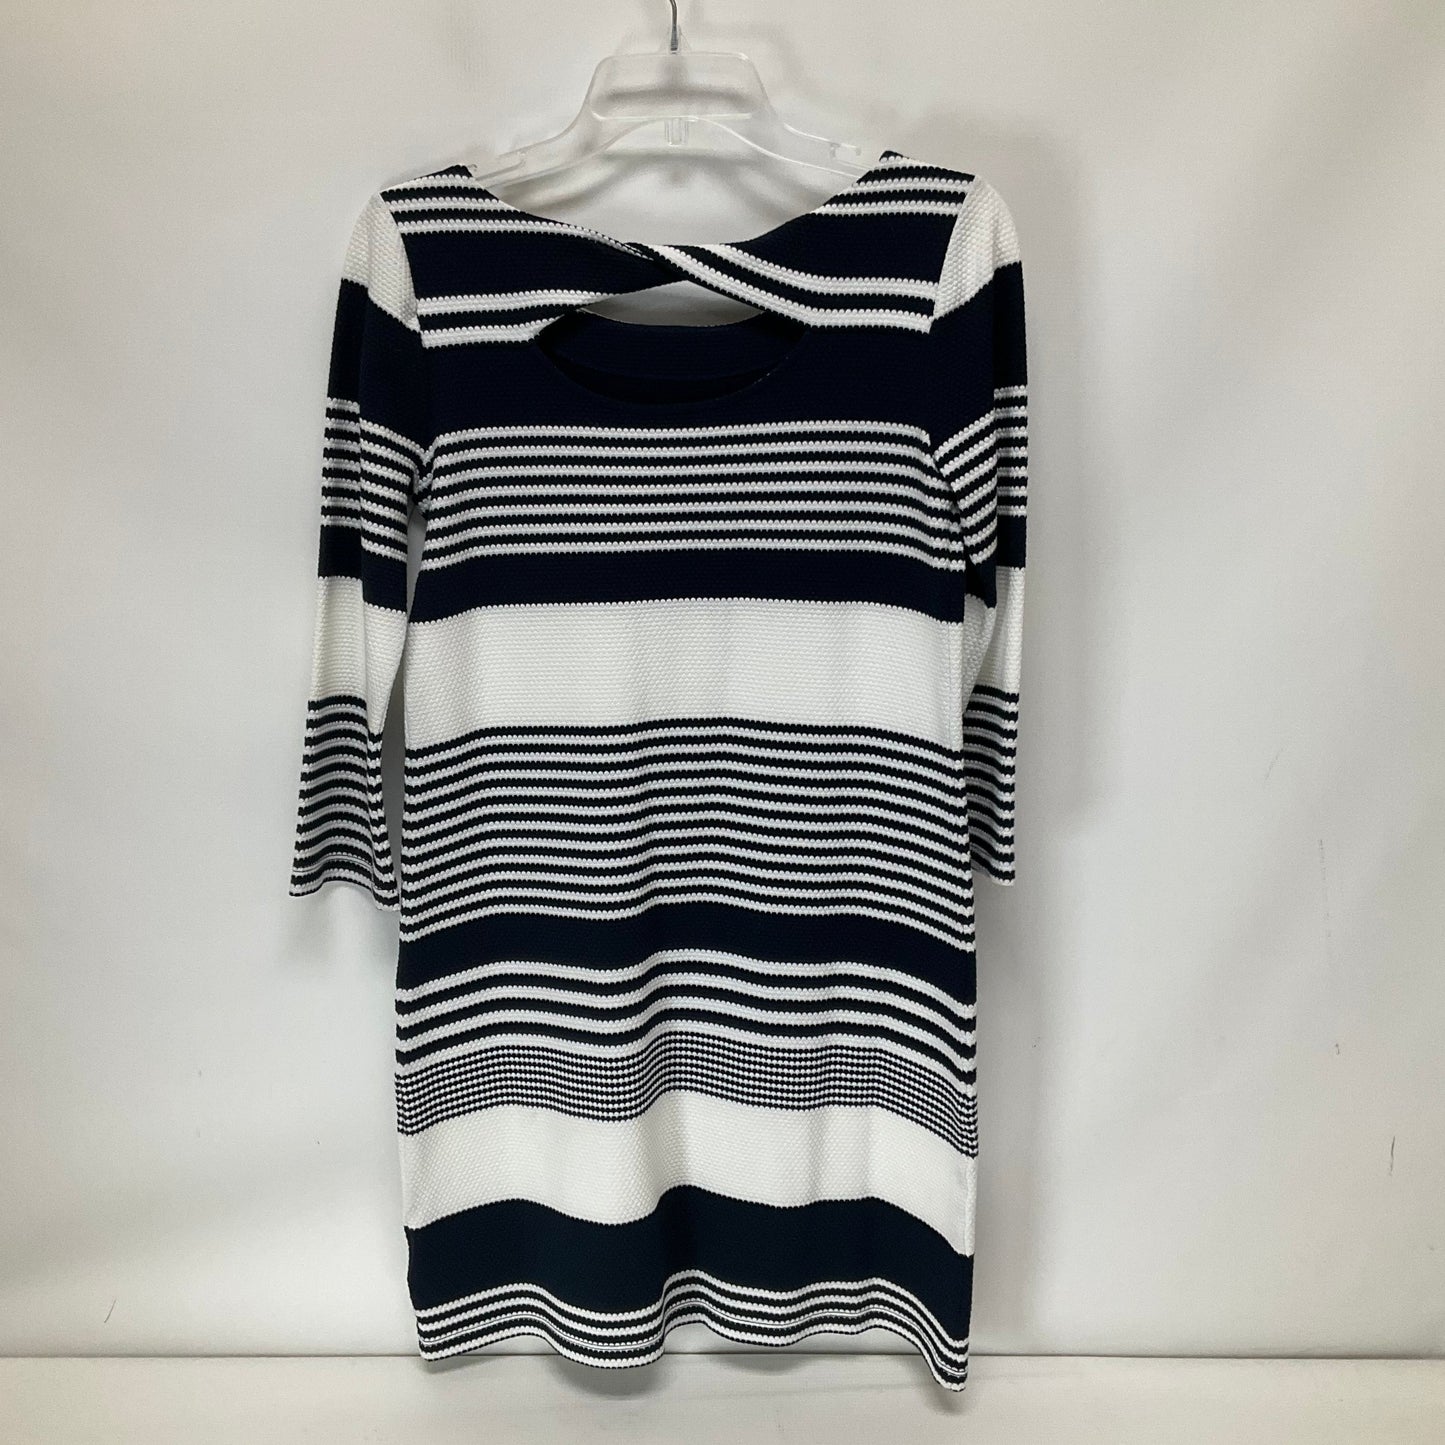 Striped Pattern Dress Casual Short Lilly Pulitzer, Size S